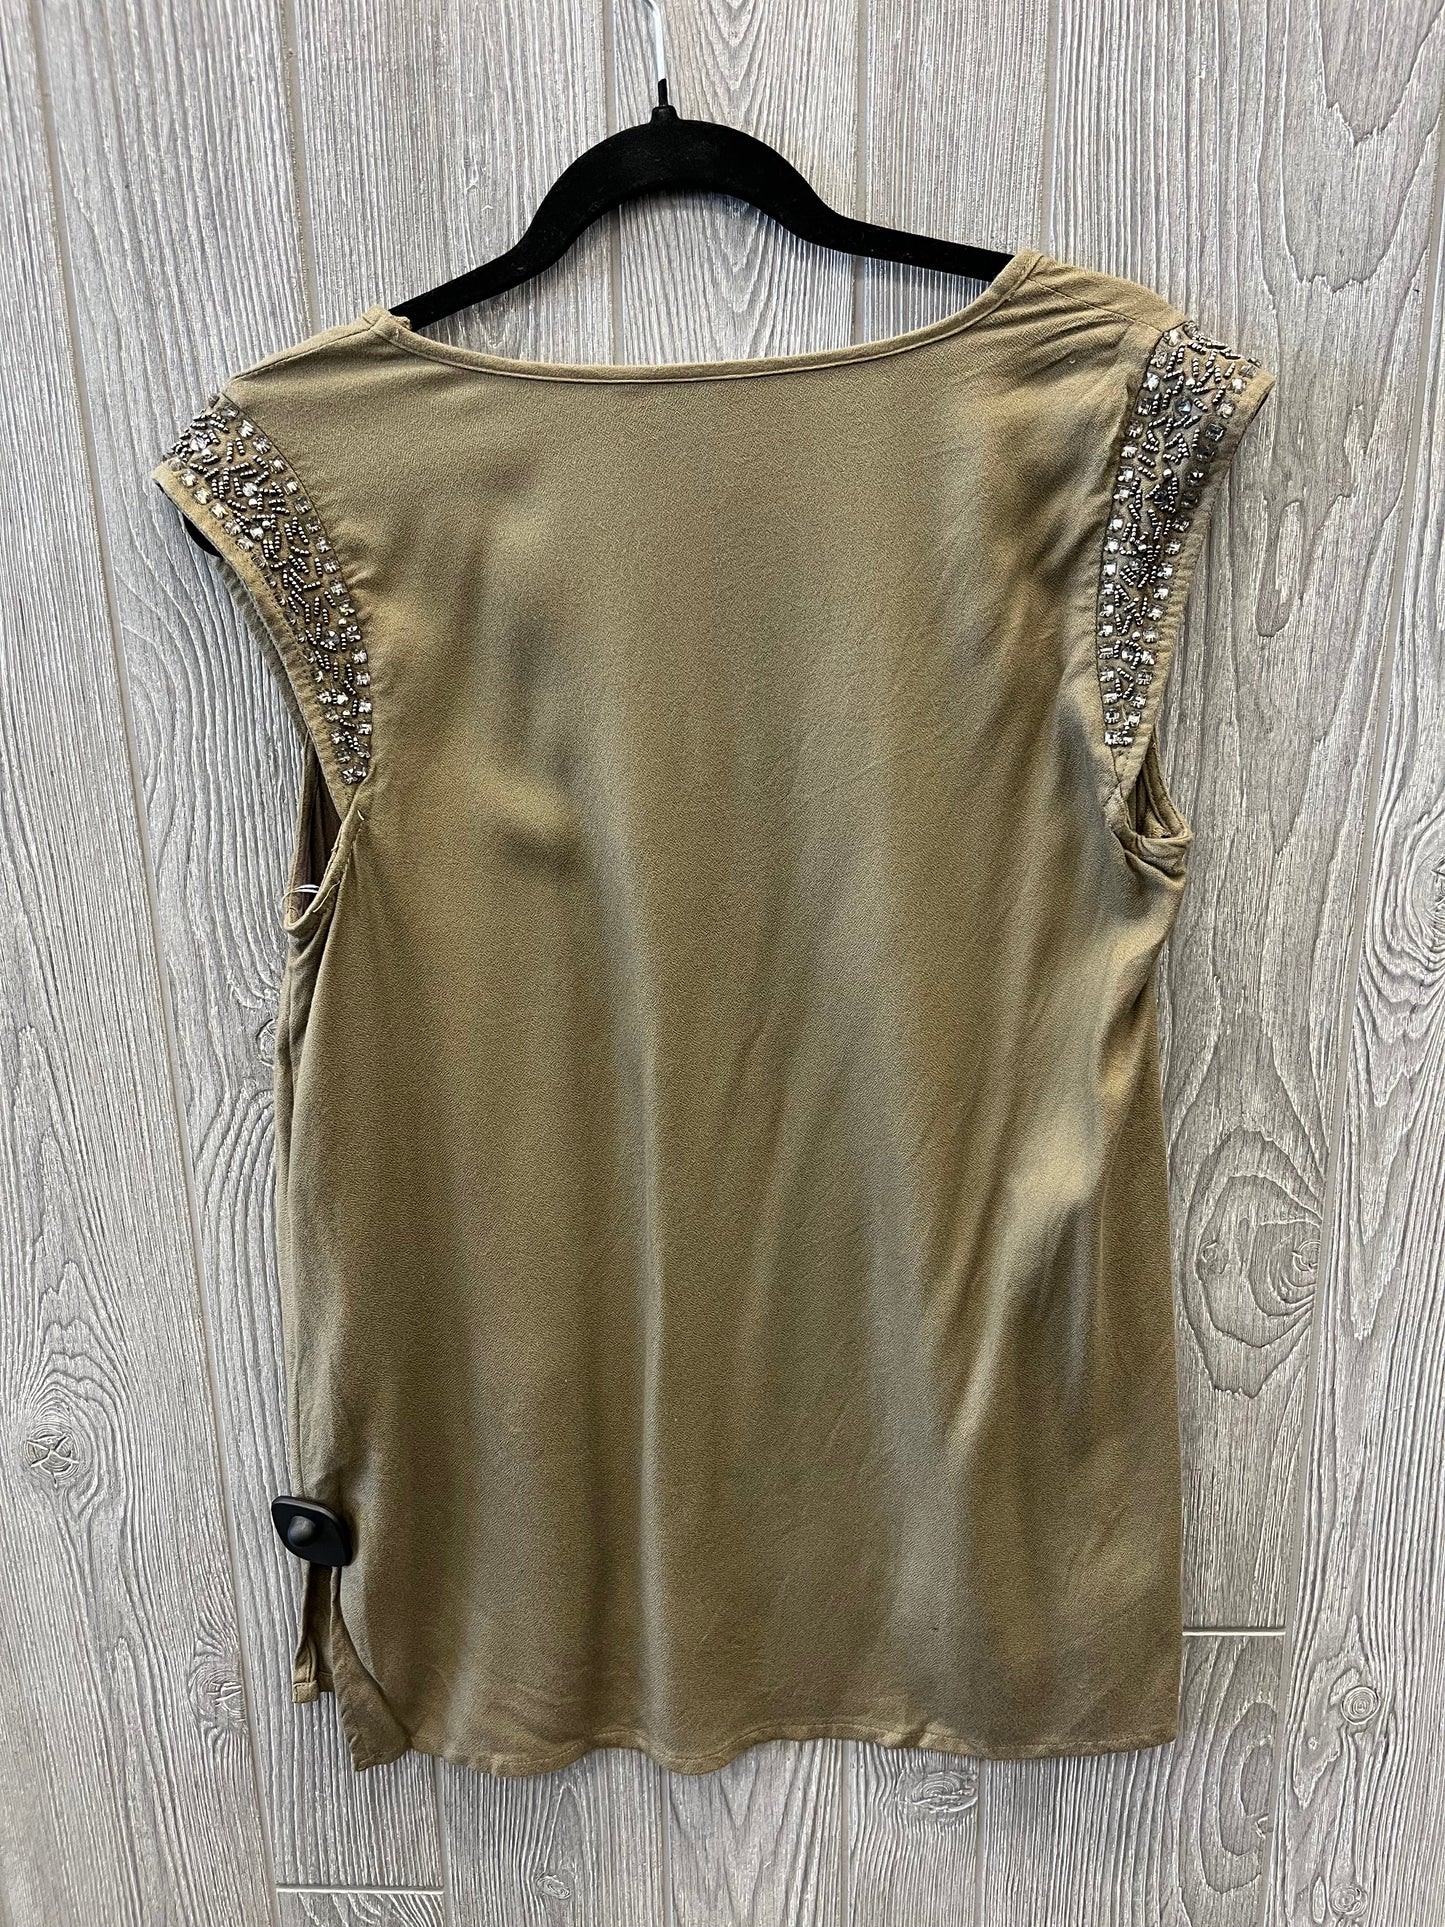 Green Top Sleeveless New York And Co, Size M